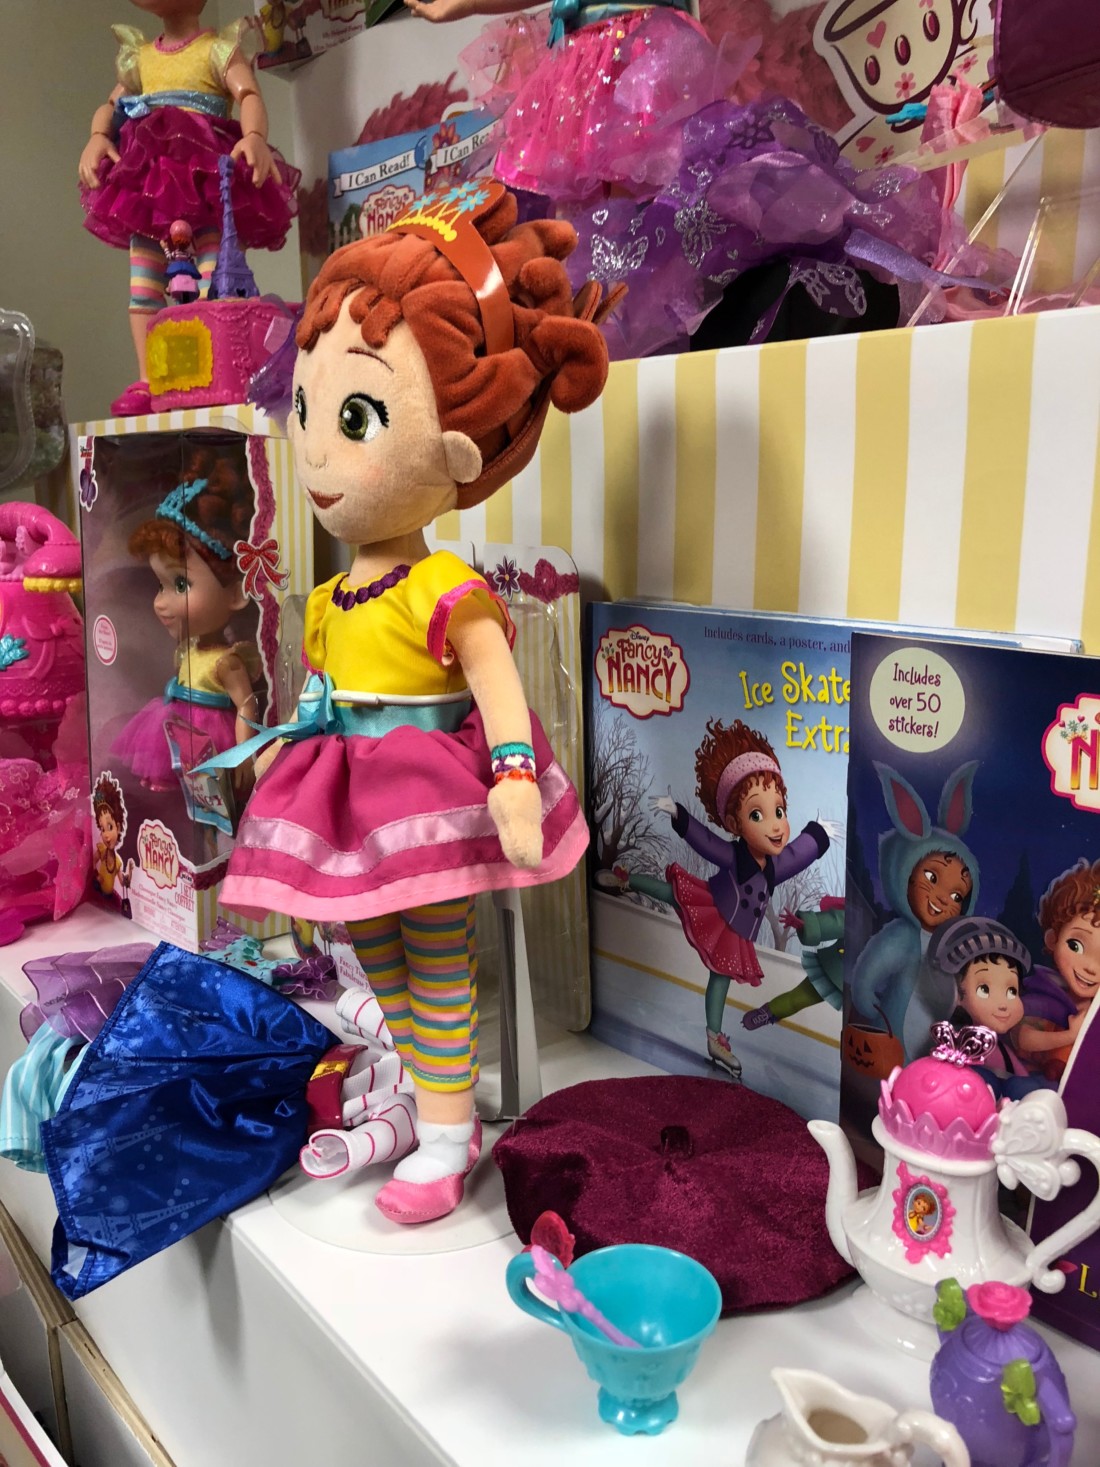 Fancy Nancy Fans – Disney Jr Has A New Show And Toys For You